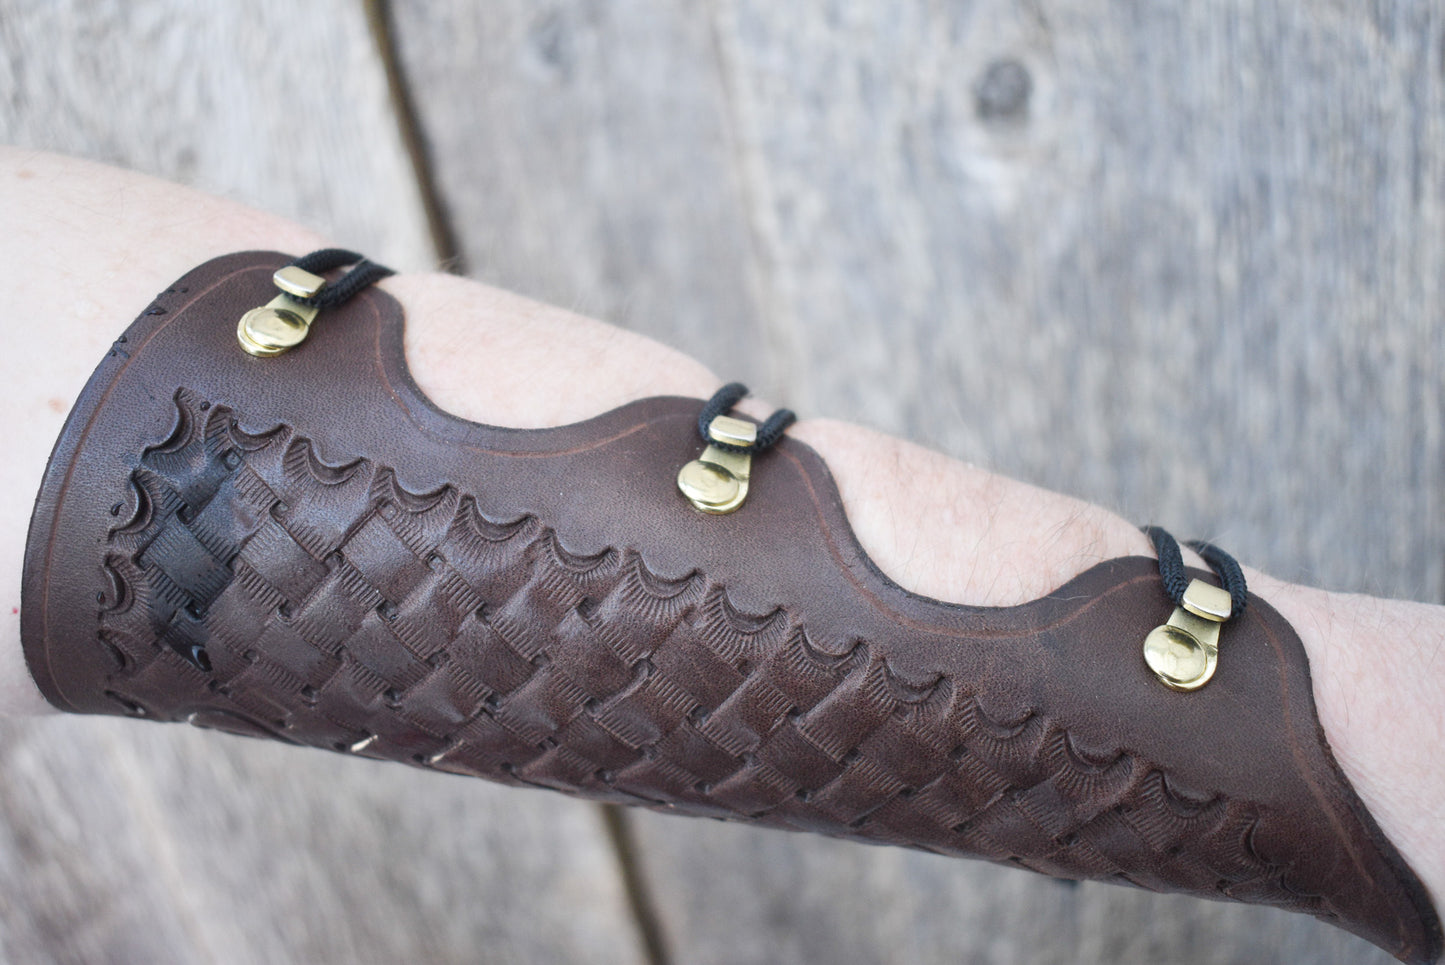 Leather Arm Guard, Archery Arm Guard, for long bows with wrist extension and basketweave tooling